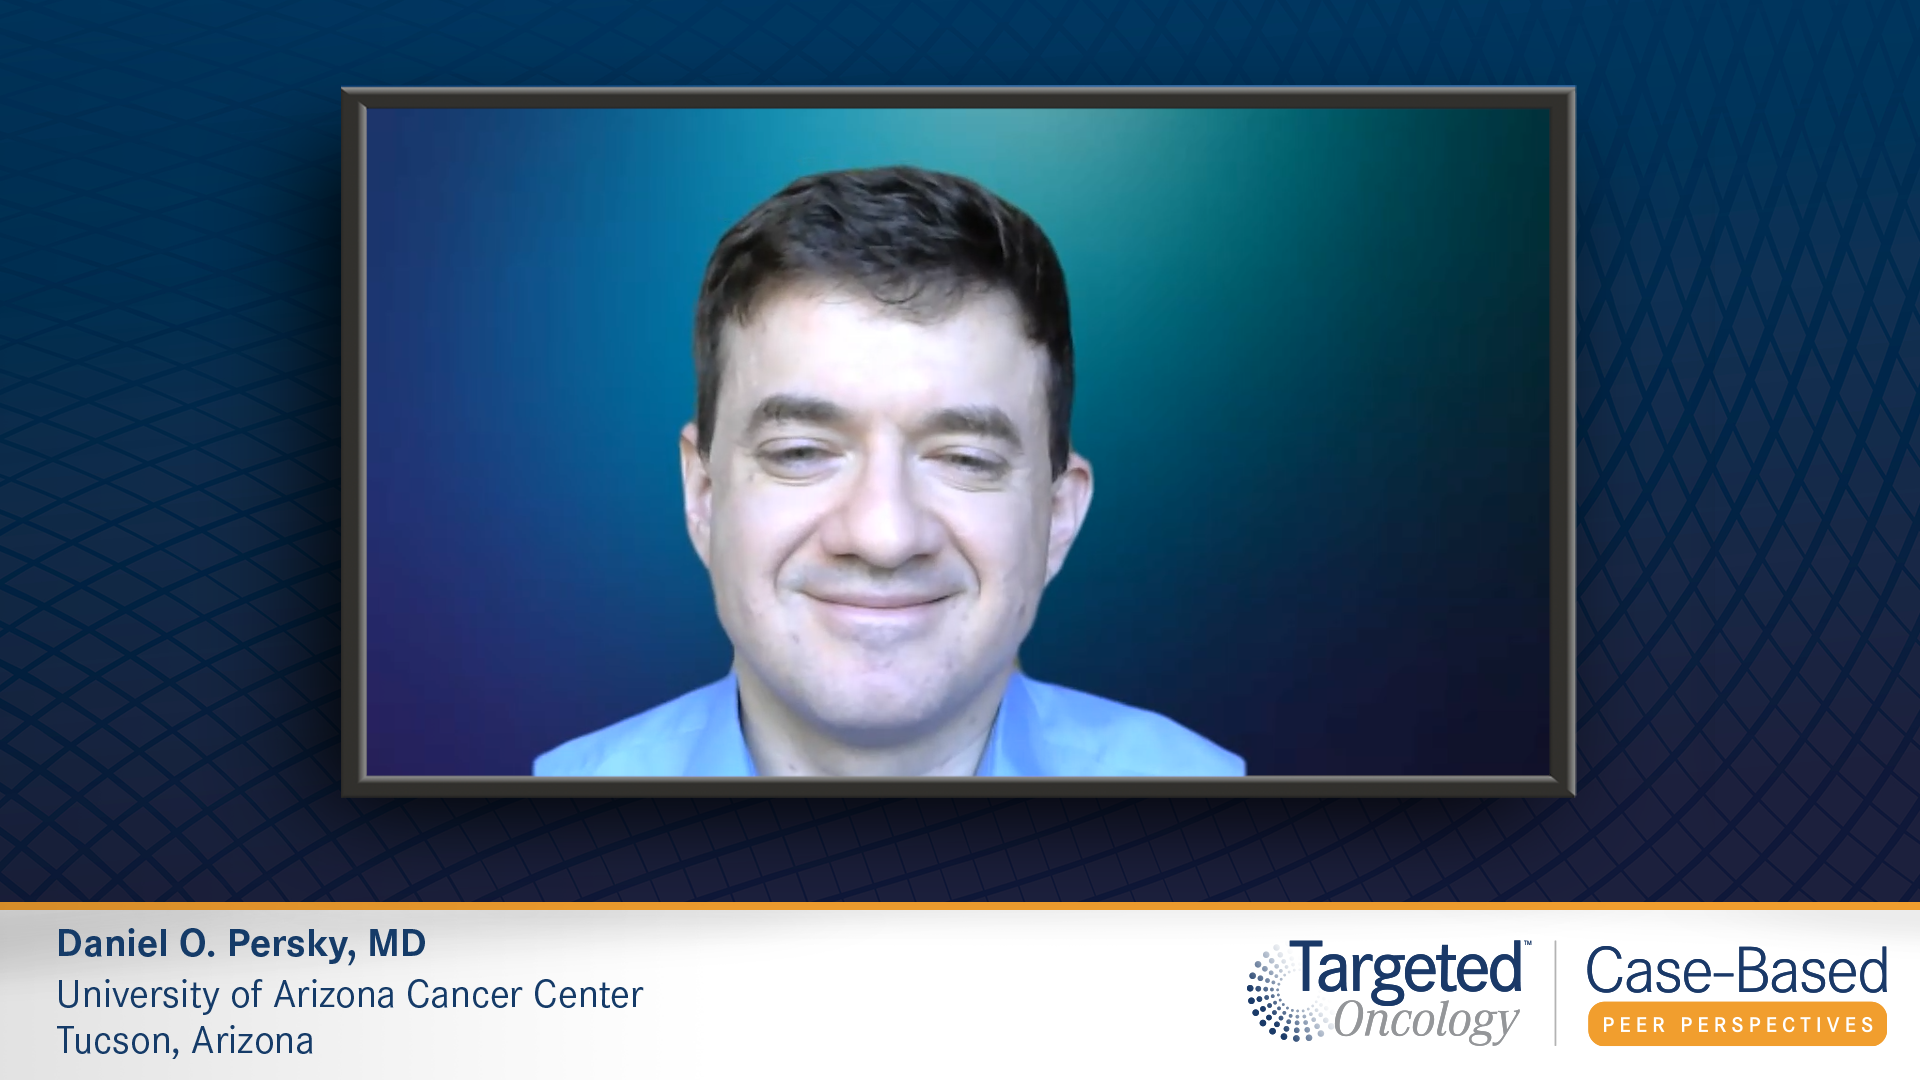 Future Therapeutic Options for Diffuse Large B-Cell Lymphoma